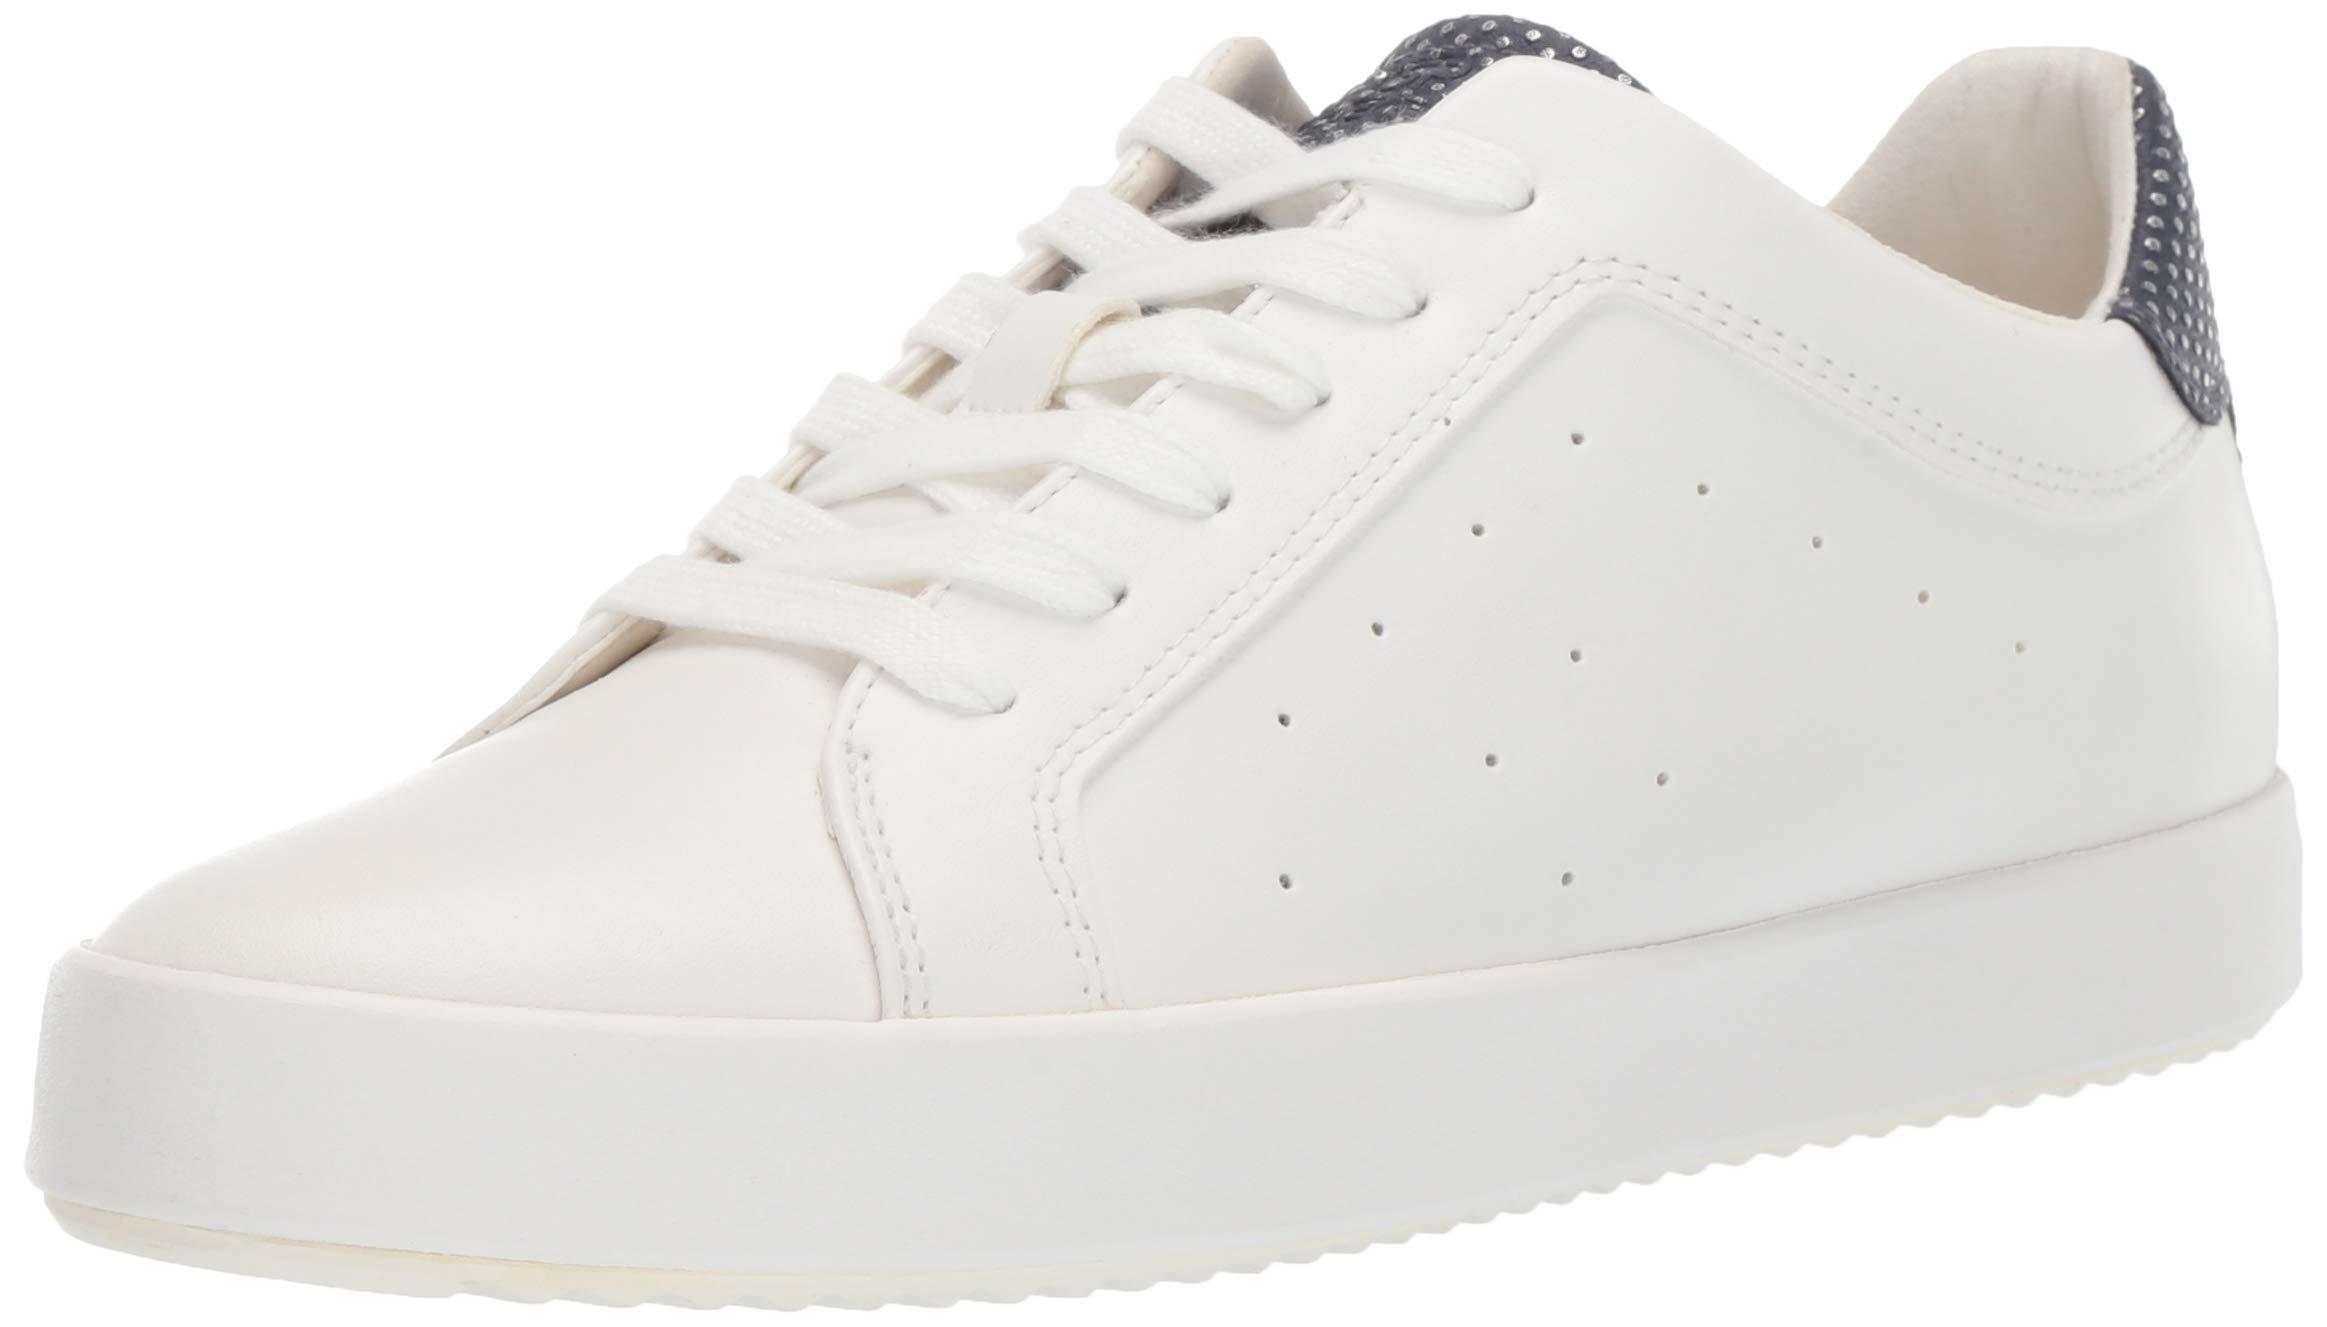 Geox Blomiee 9 Fashion Sneaker in White/Navy (White) - Save 32% - Lyst